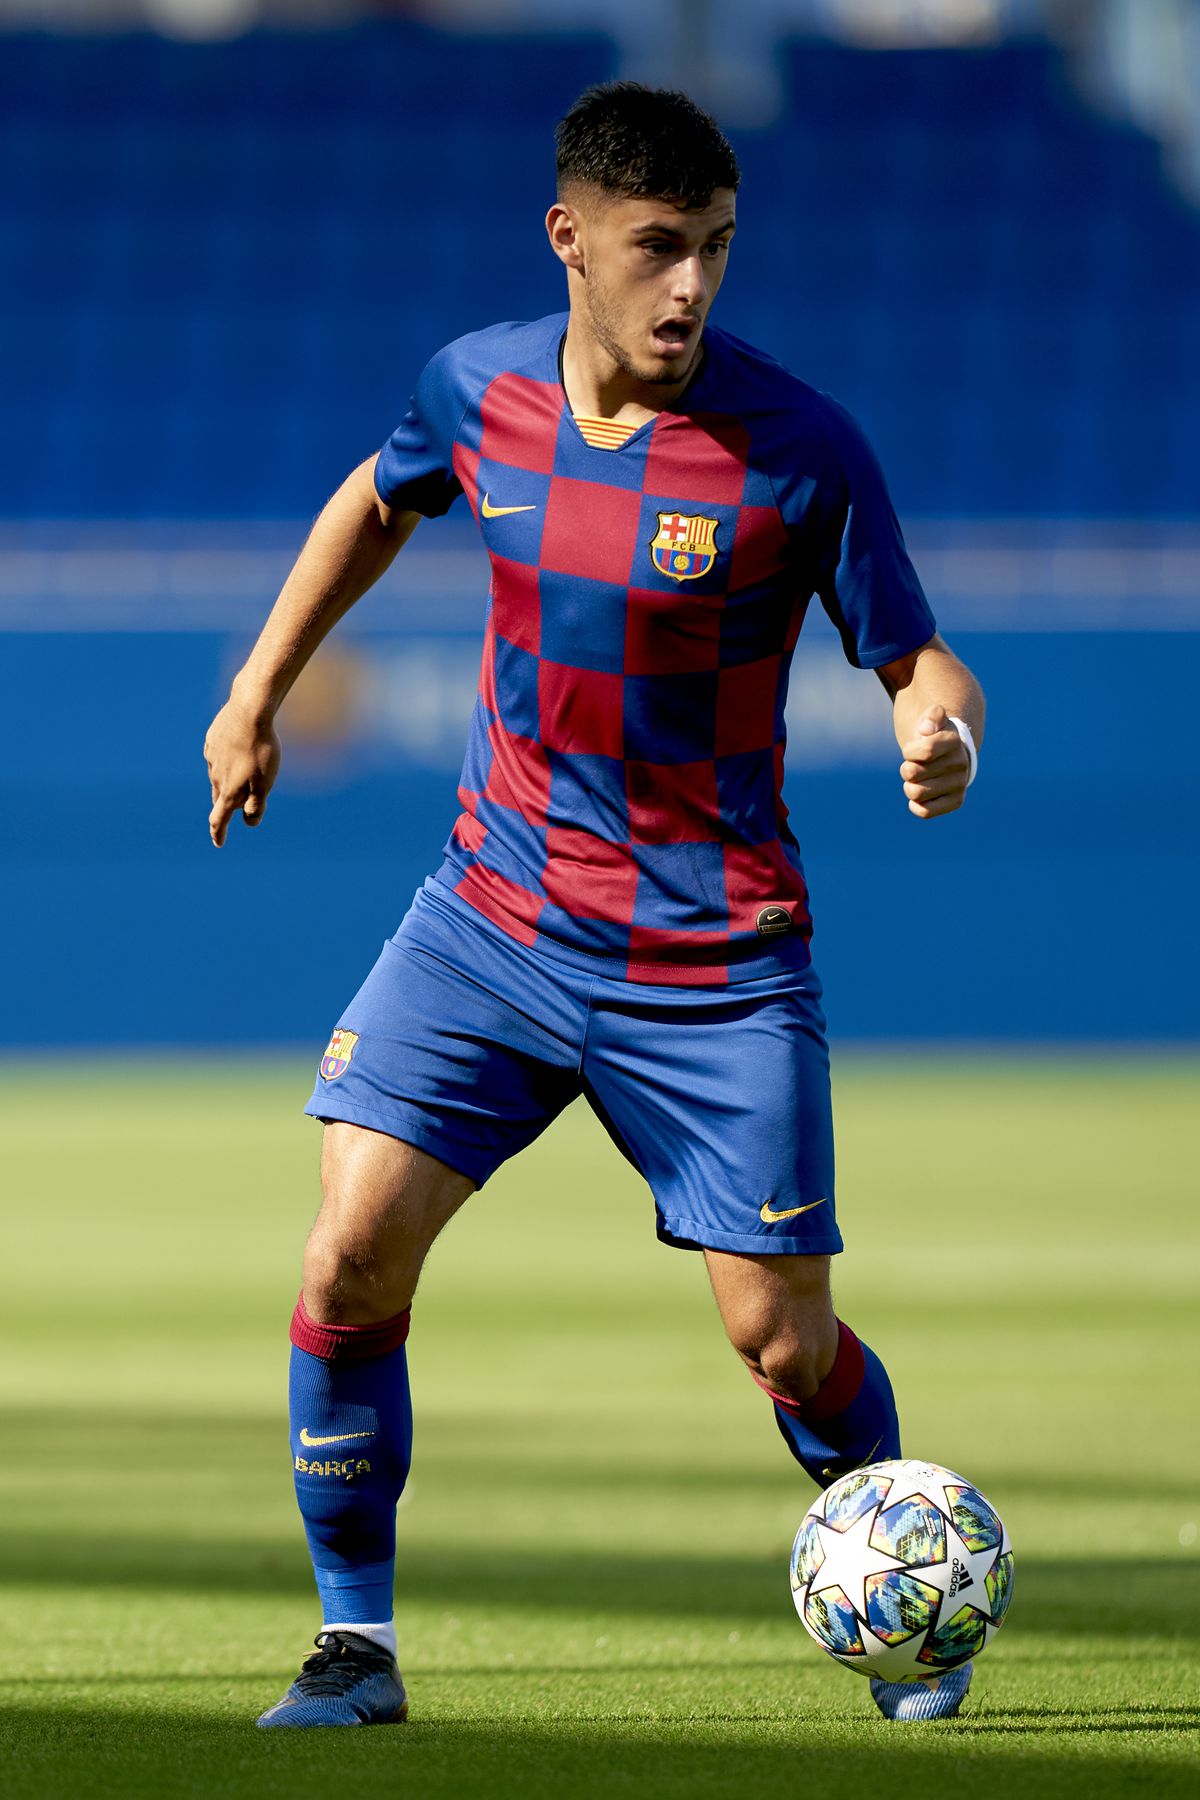 Real Madrid sign the captain of Barcelona's youth team